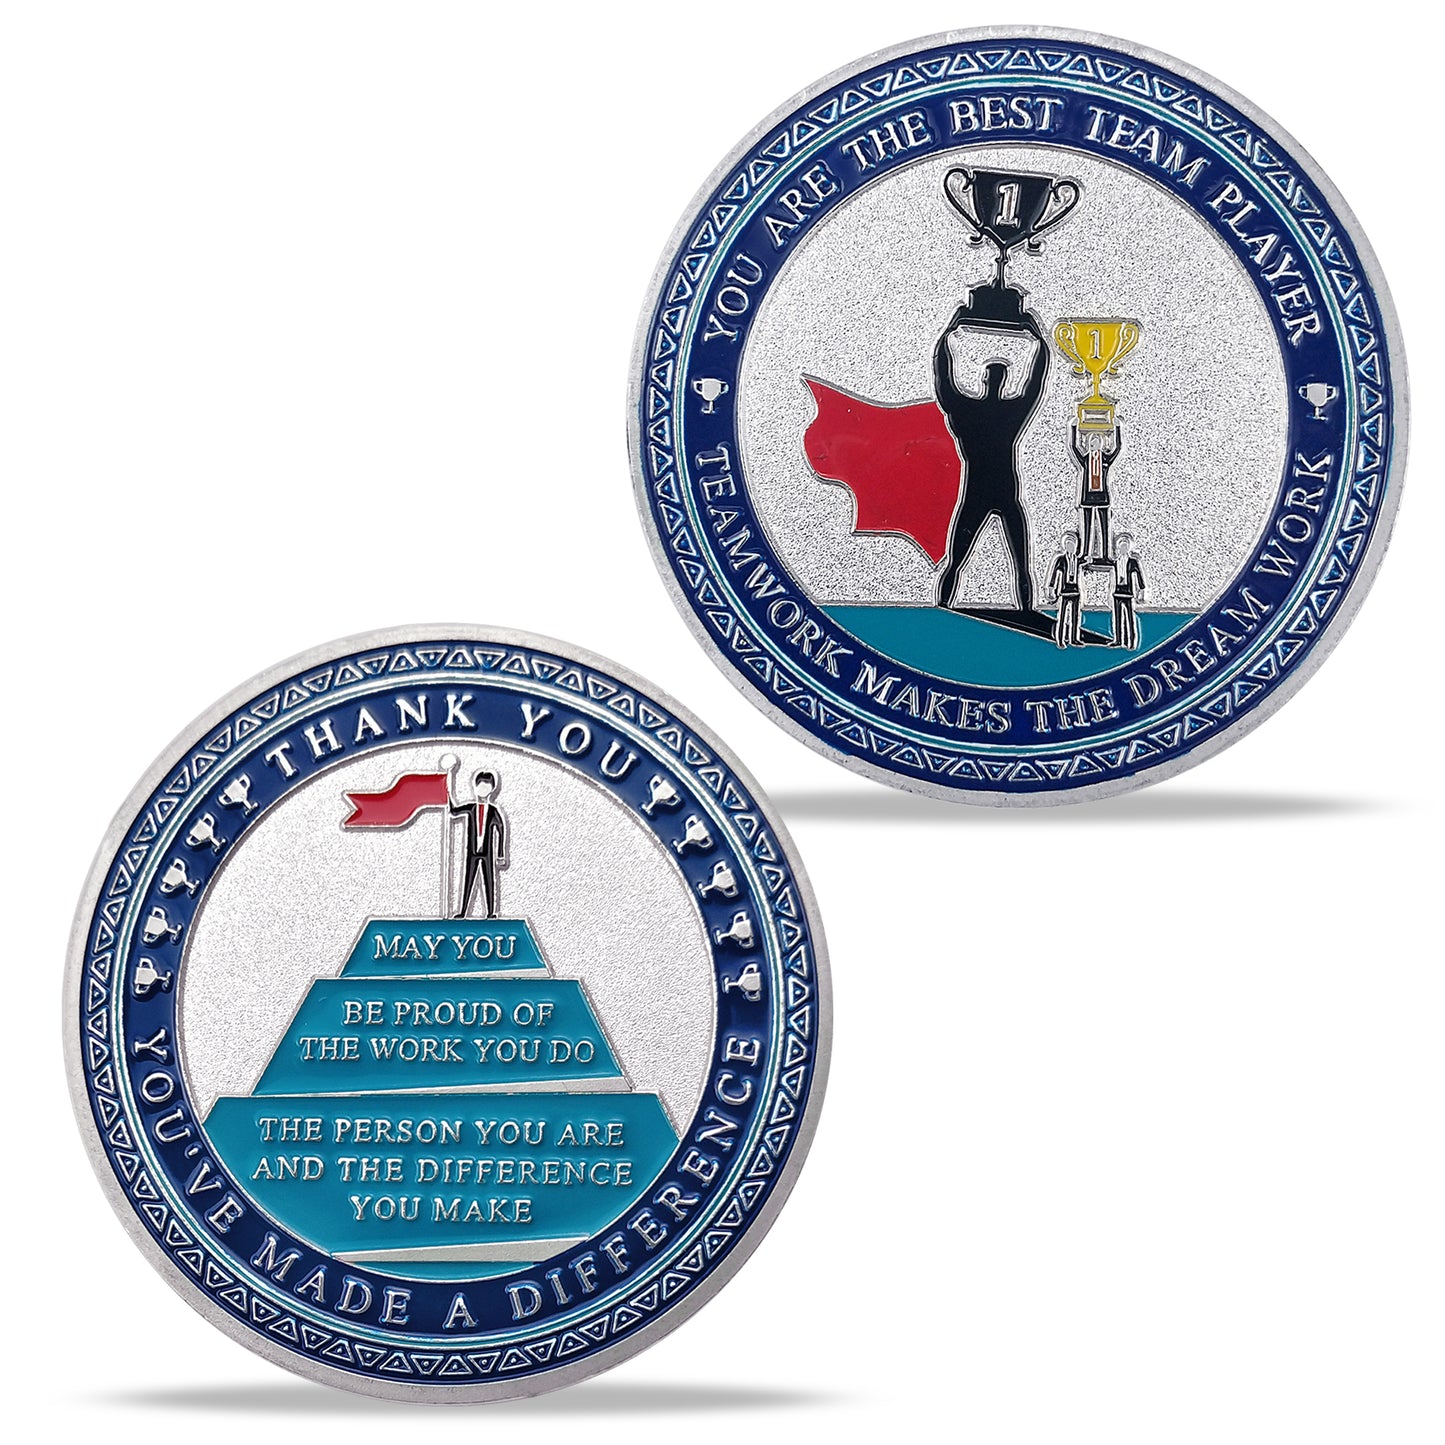 Encouragement Challenge Coin-Employee Appreciation Gifts Inspirational Thank You Coin for Students and Cowokers-Team Superman